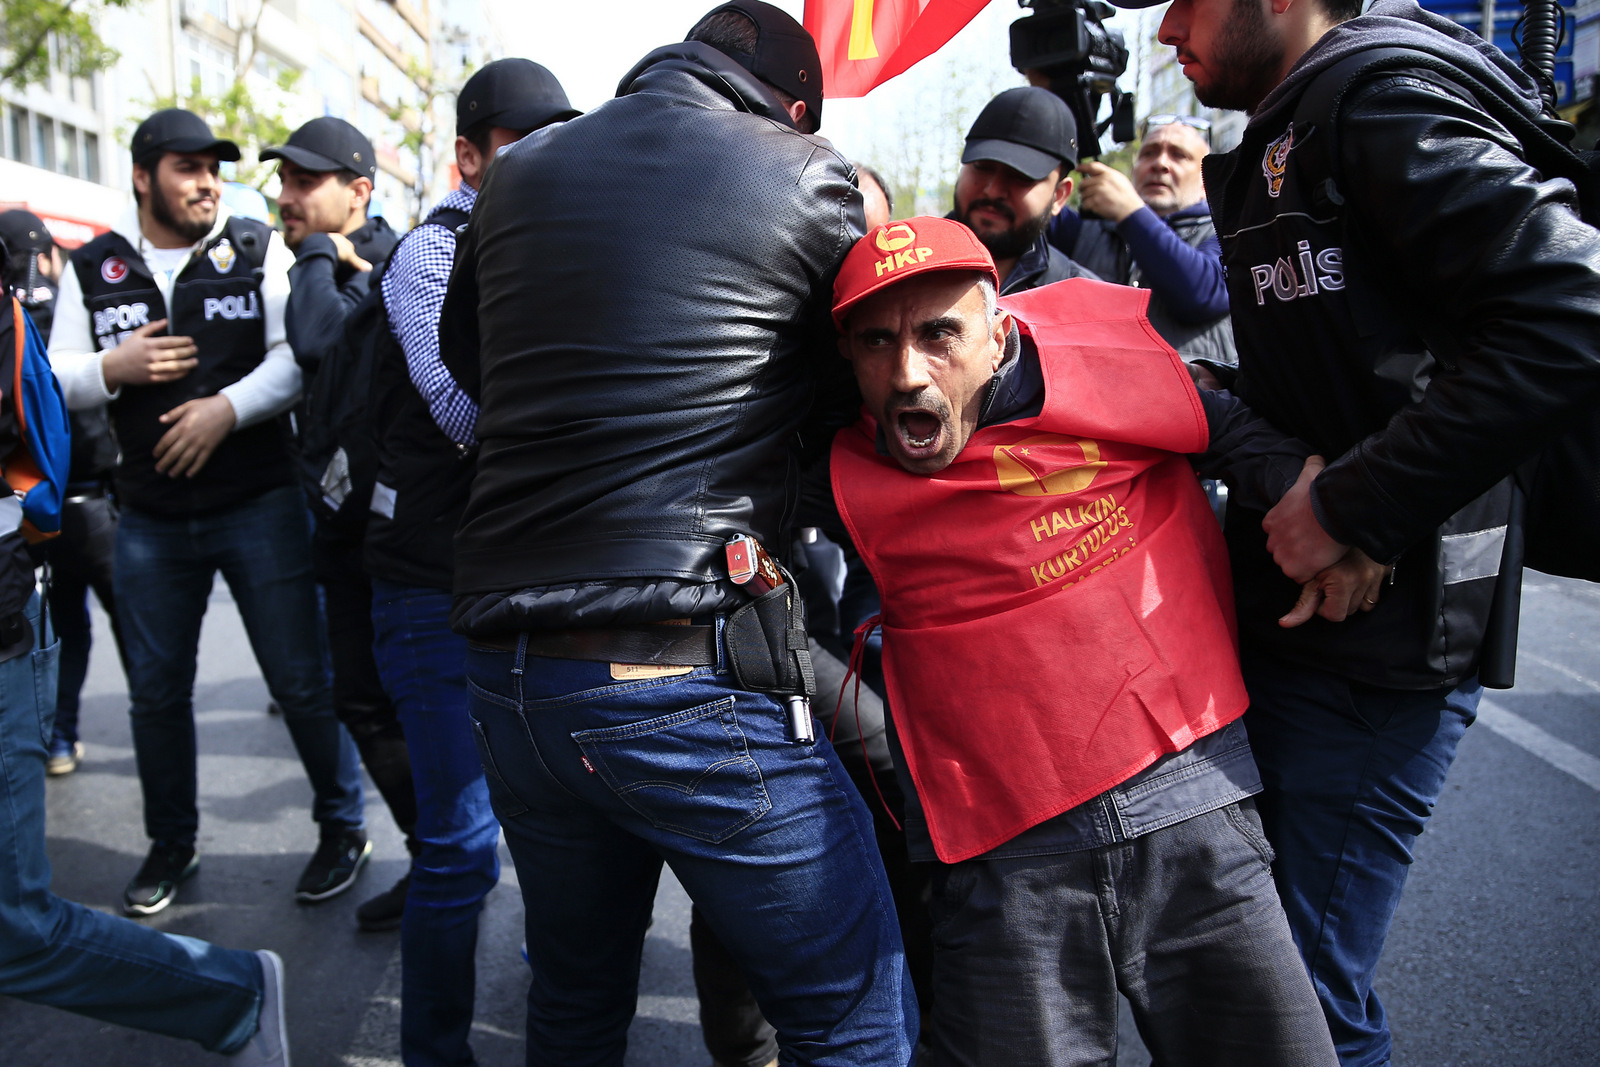 Police arrest demonstrators as they march during May Day, in Istanbul, Monday, May 1, 2017. Security forces prevented leftist groups trying to reach city's iconic Taksim Square to celebrate May Day.